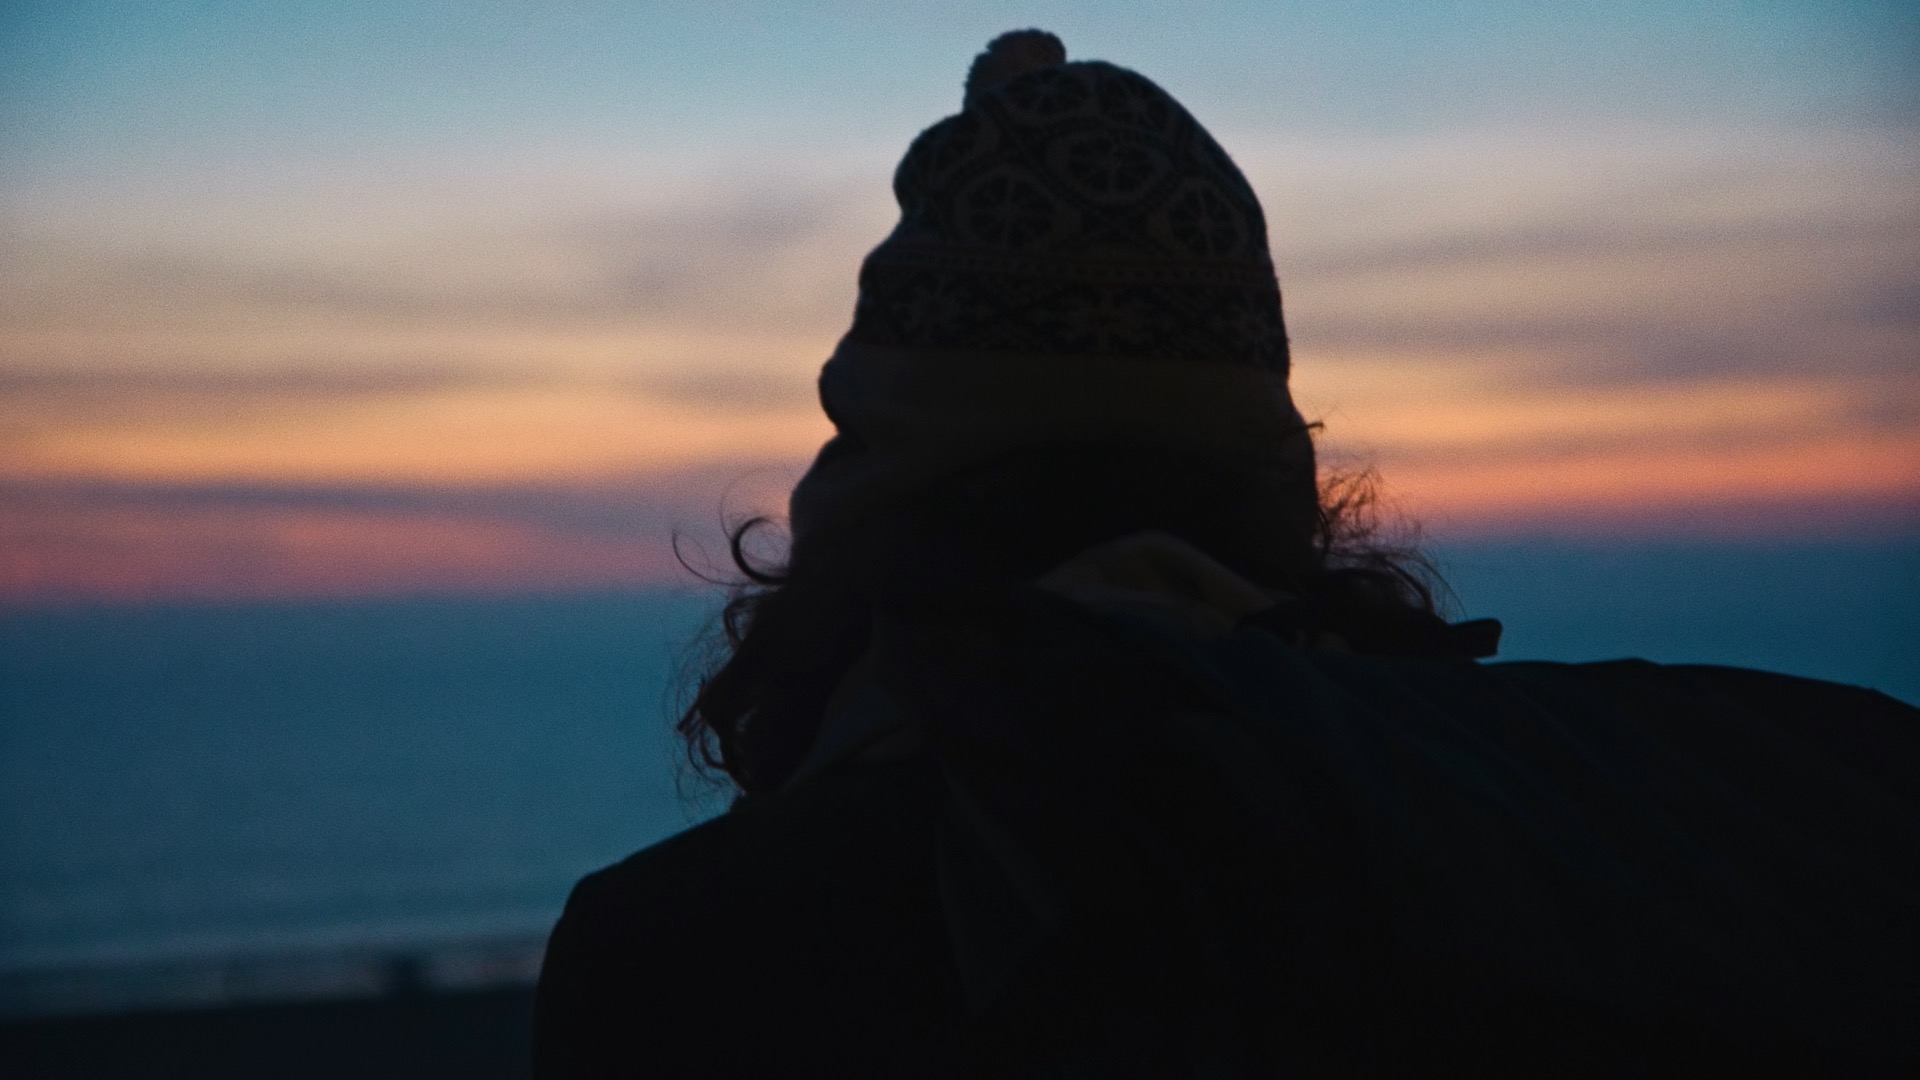 Film still from 'Your Friend Memphis': the silhouette of a person's back, as they look out to a sunset over the ocean.